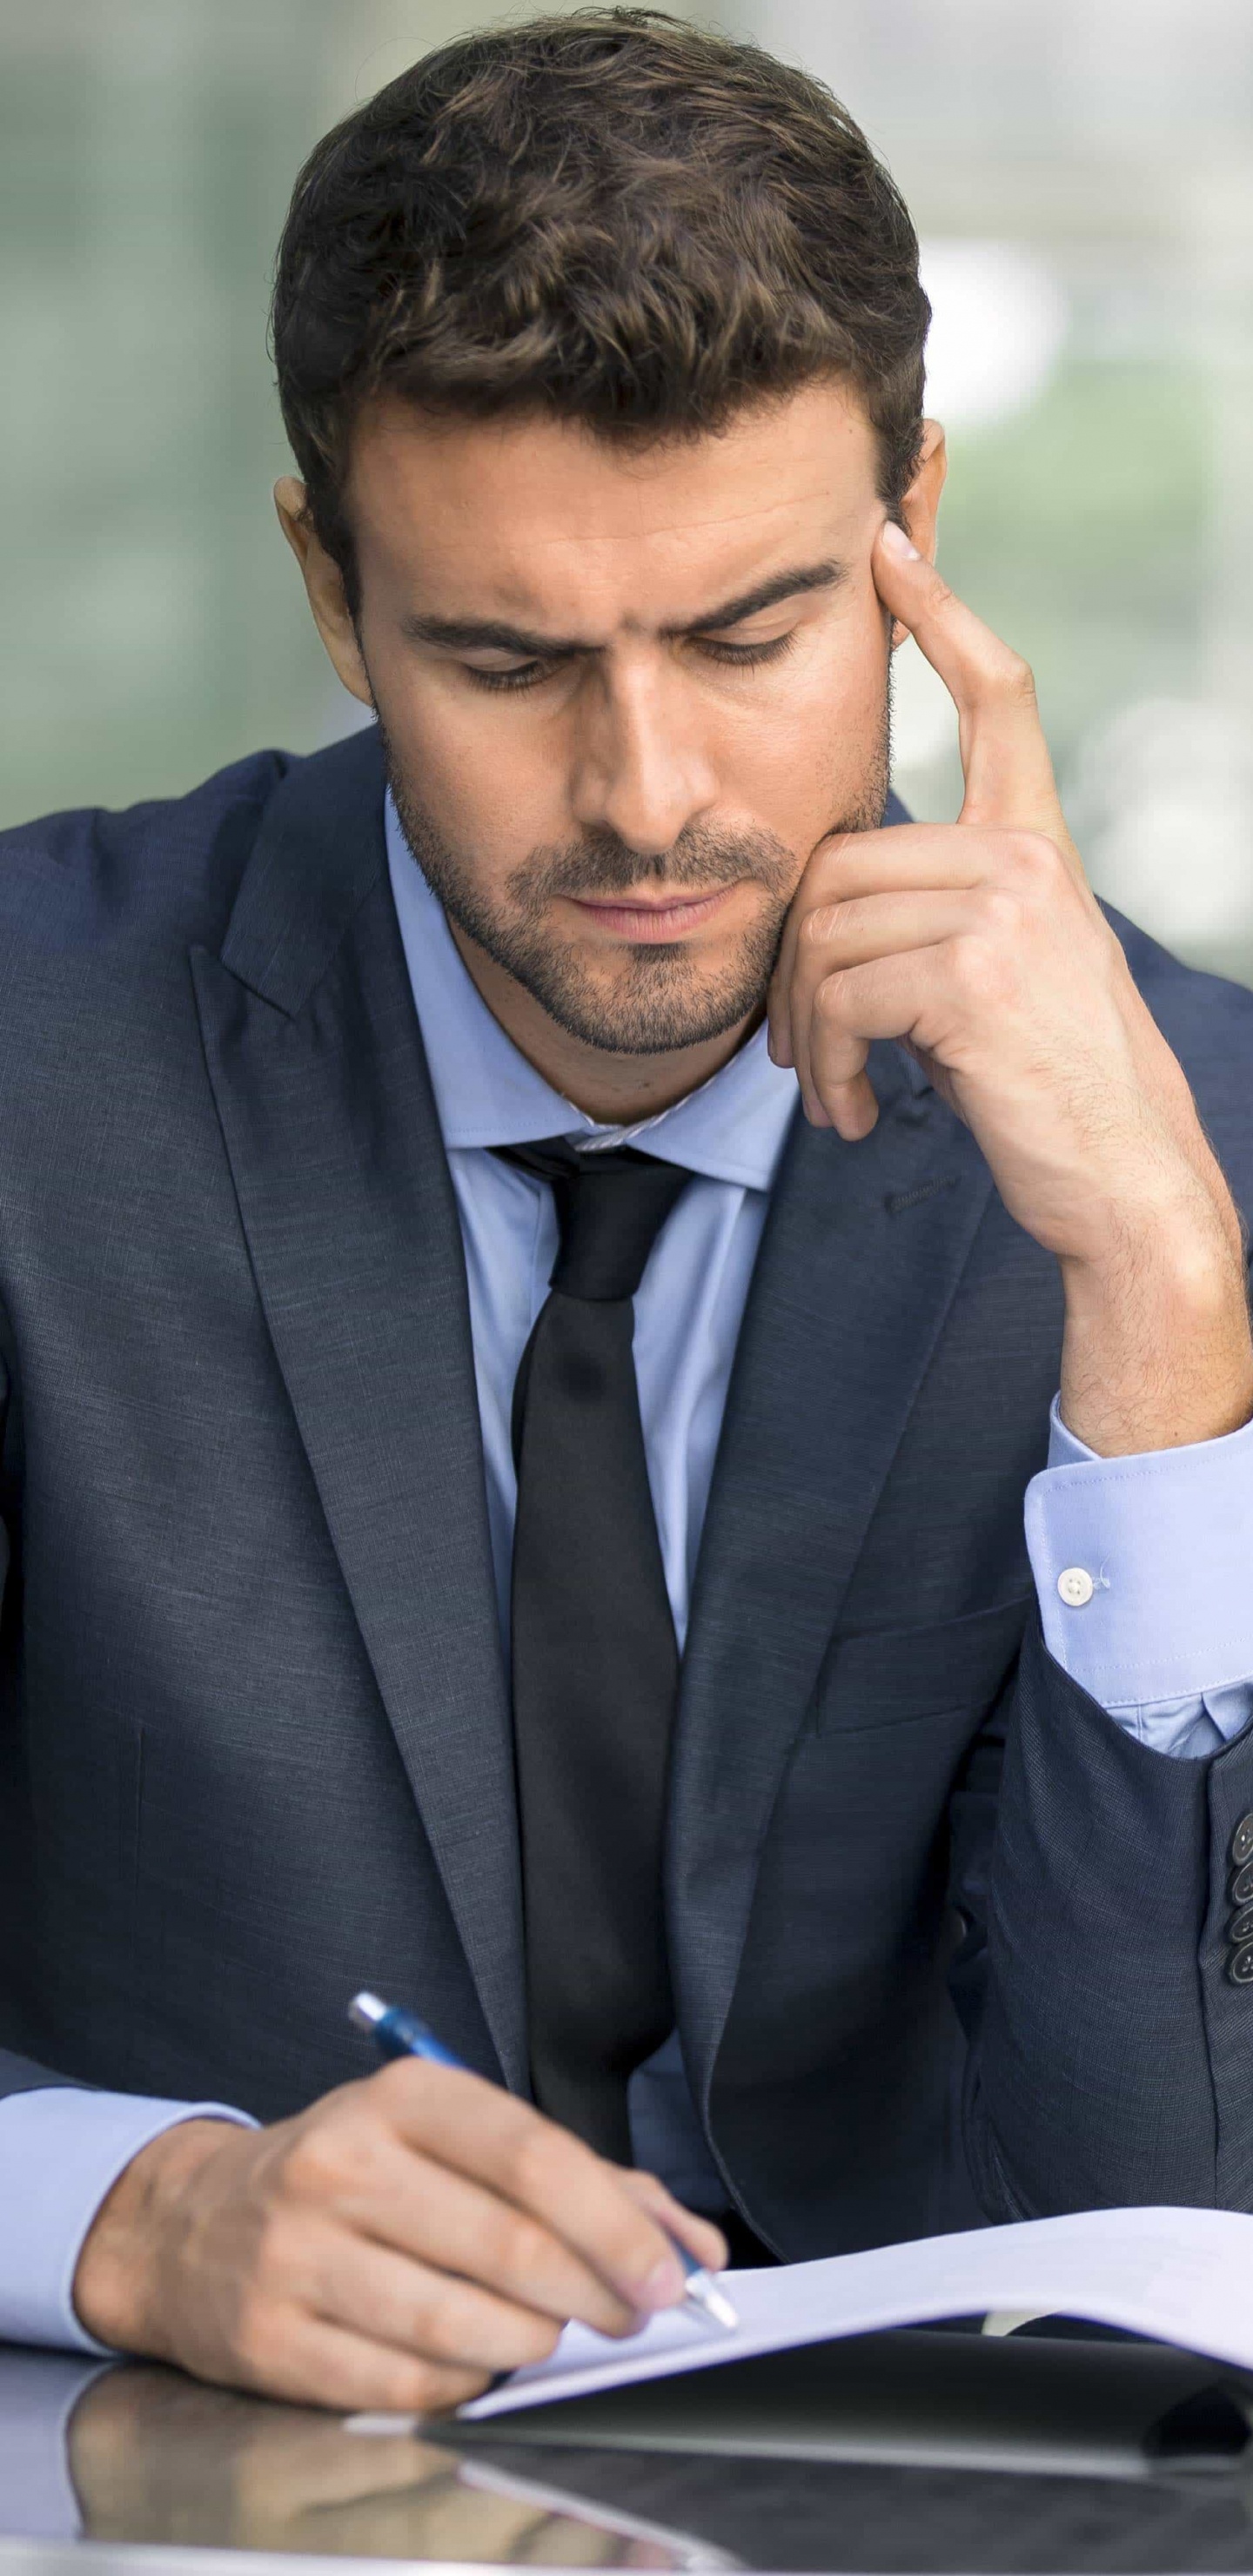 Businessman Thinking, Businessperson, Thought, Job, Business. Wallpaper in 1440x2960 Resolution